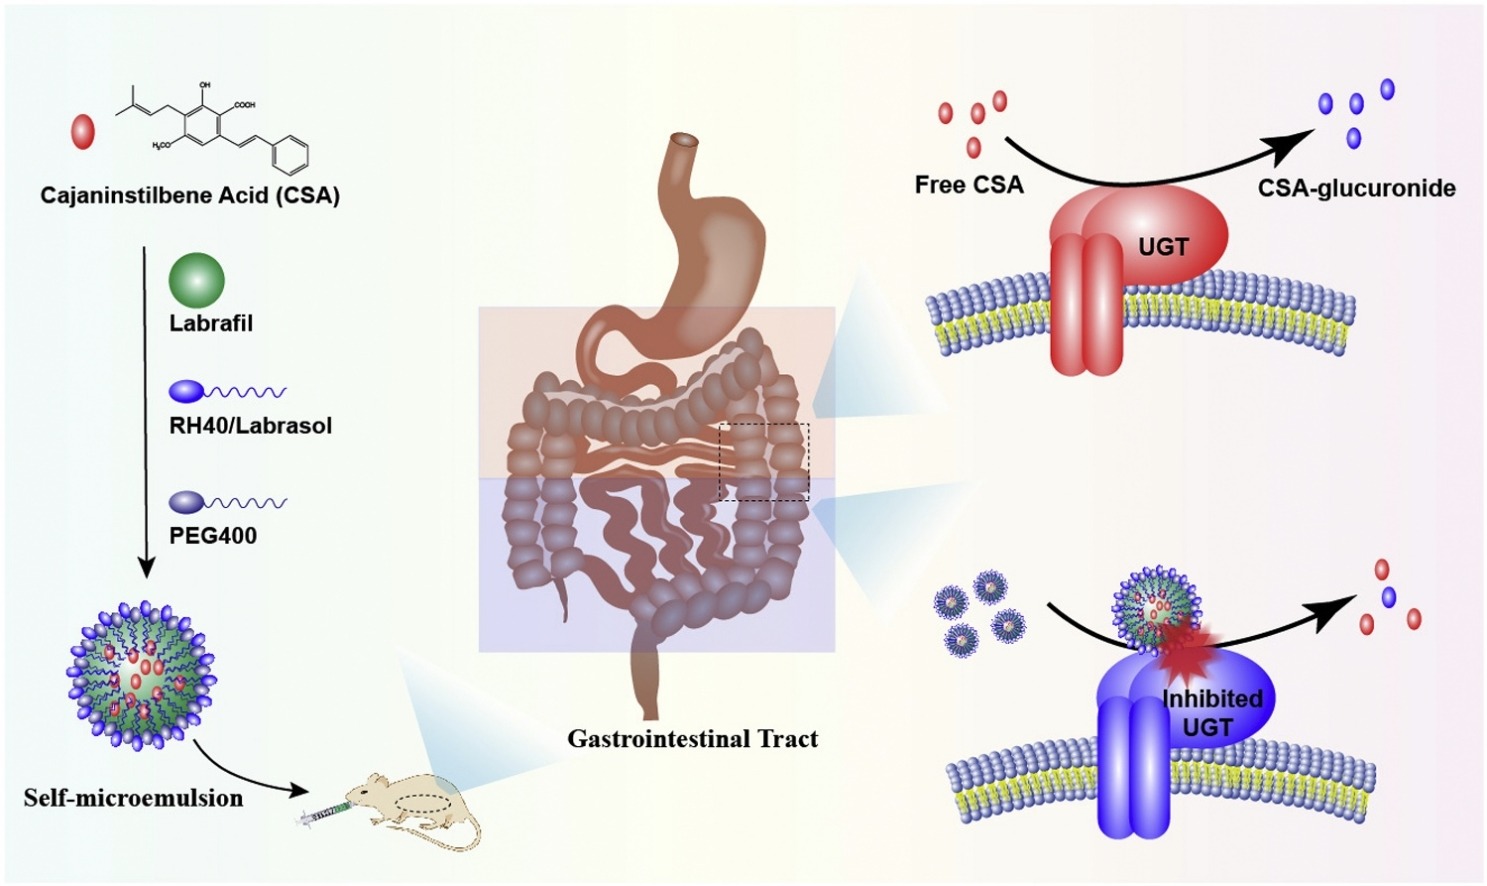 Enhancing in vivo oral bioavailability of cajaninstilbene acid using  UDP-glucuronosyl transferase inhibitory excipient containing  self-microemulsion | Pharma Excipients